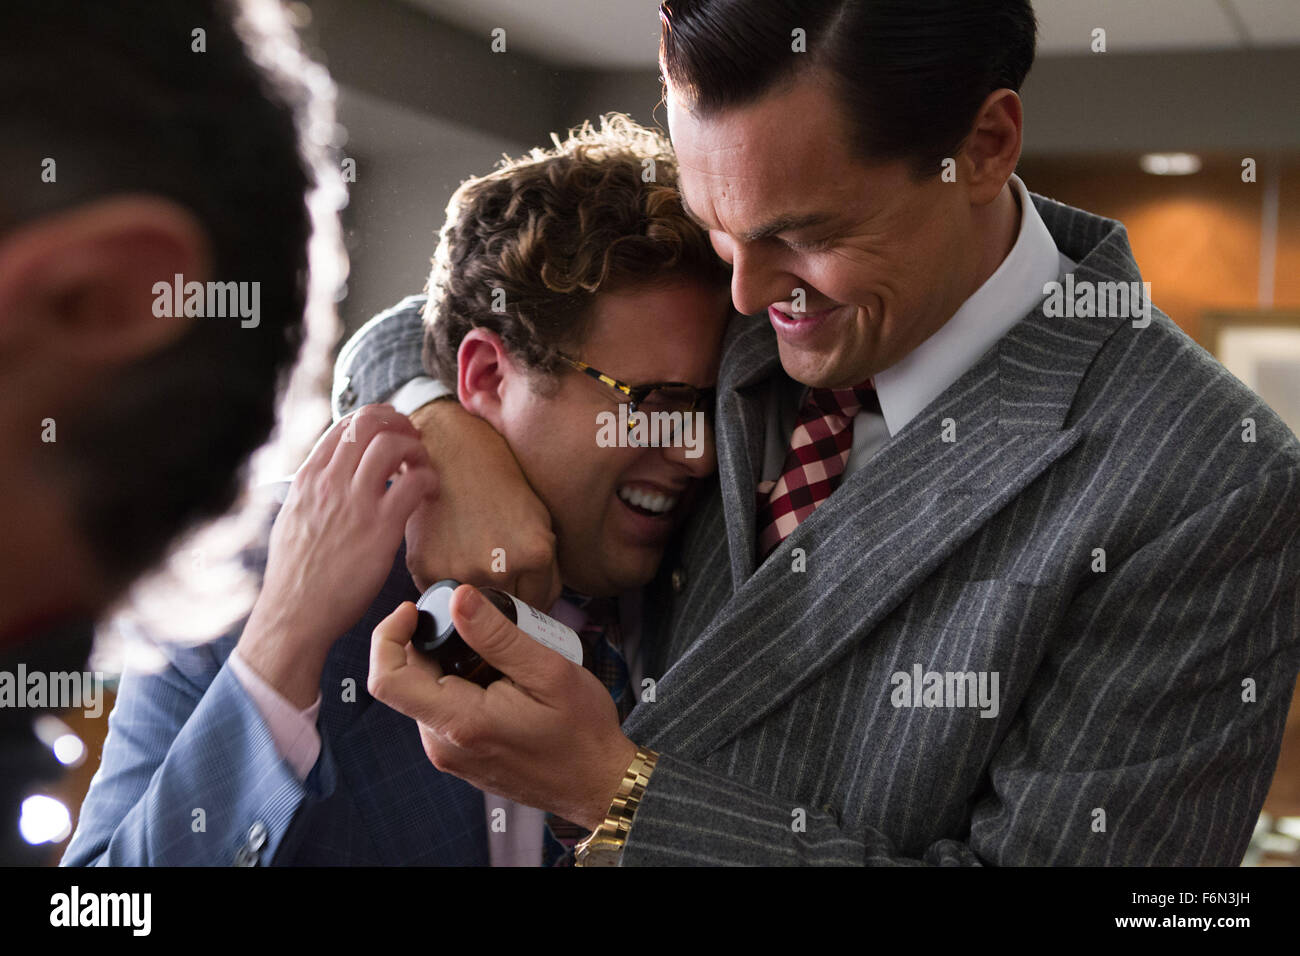 RELEASE DATE: November 15, 2013 TITLE: The Wolf Of Wall Street STUDIO: Paramount Pictures DIRECTOR: Martin Scorsese PLOT: Based on the true story of Jordan Belfort, from his rise to a wealthy stockbroker living the high life to his fall involving crime, corruption and the federal government PICTURED: JONAH HILL as Danny and LEONARDO DICAPRIO as Jordan Belfort (Credit Image: c Paramount Pictures/Entertainment Pictures) Stock Photo